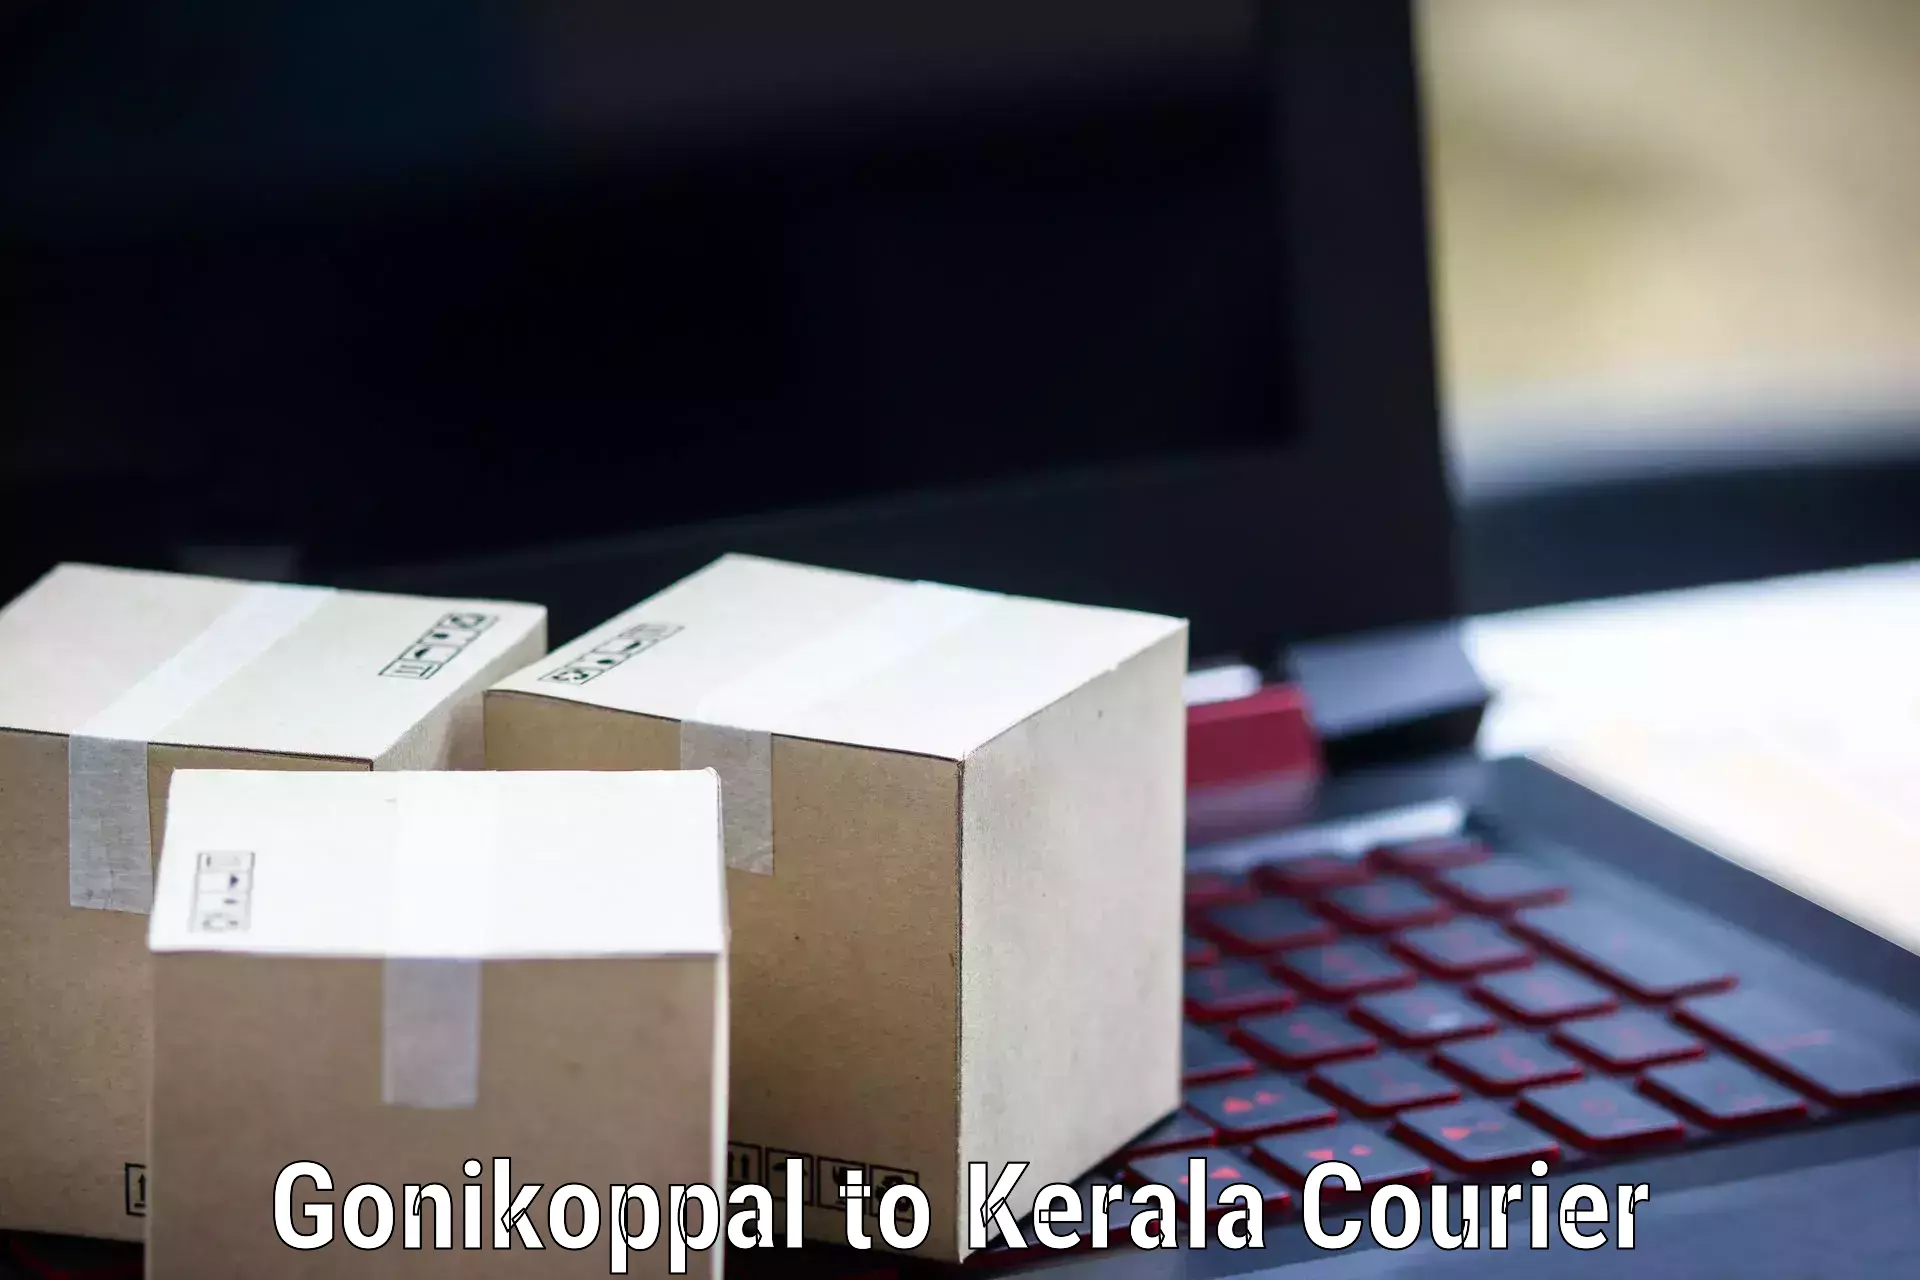 Express delivery capabilities Gonikoppal to Angamaly